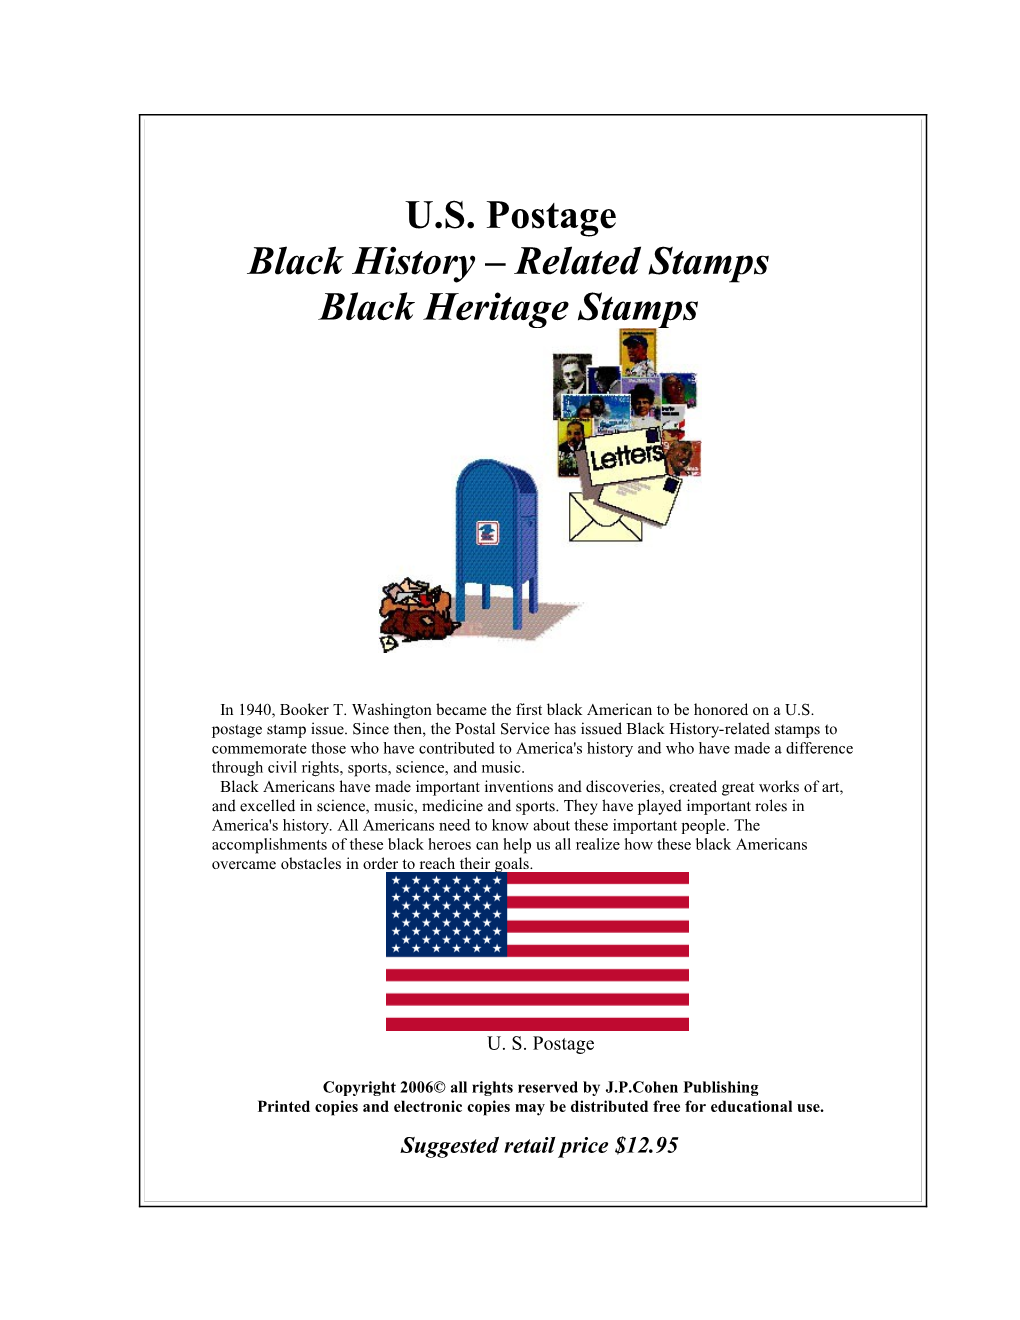 Black History Related Stamps